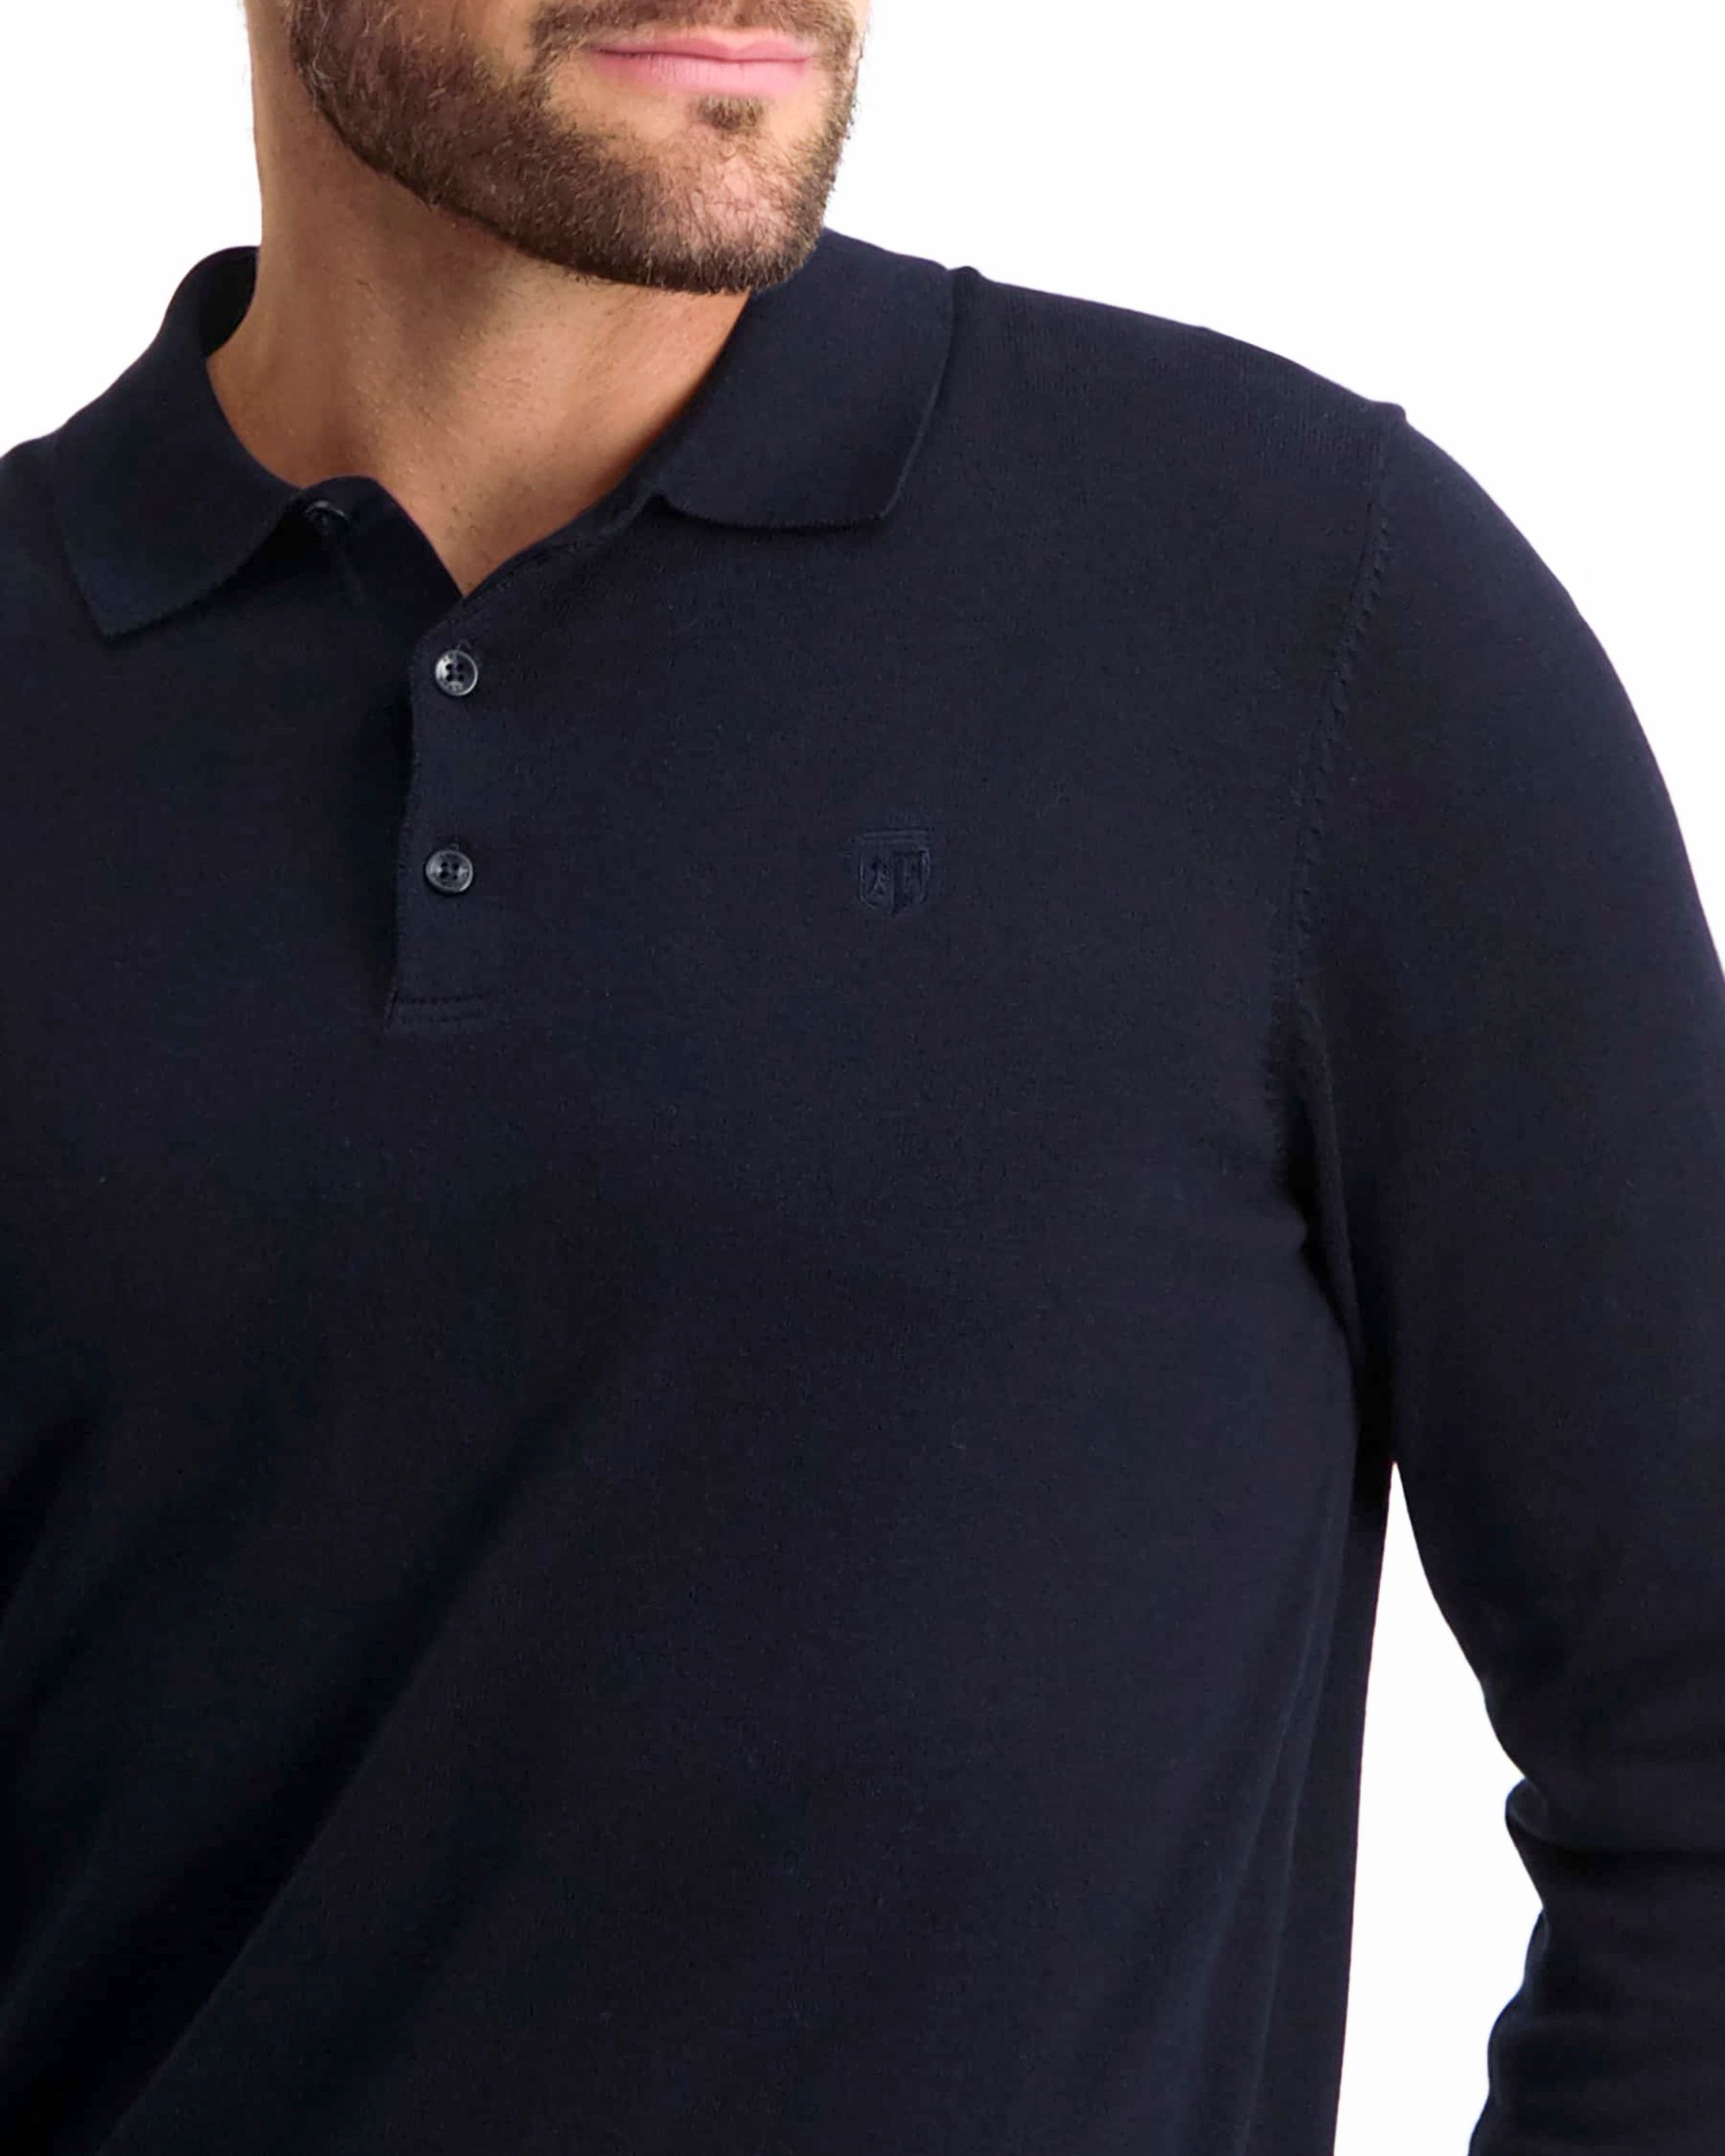 State of Art Polo LM Donker blauw 081097-001-4XL